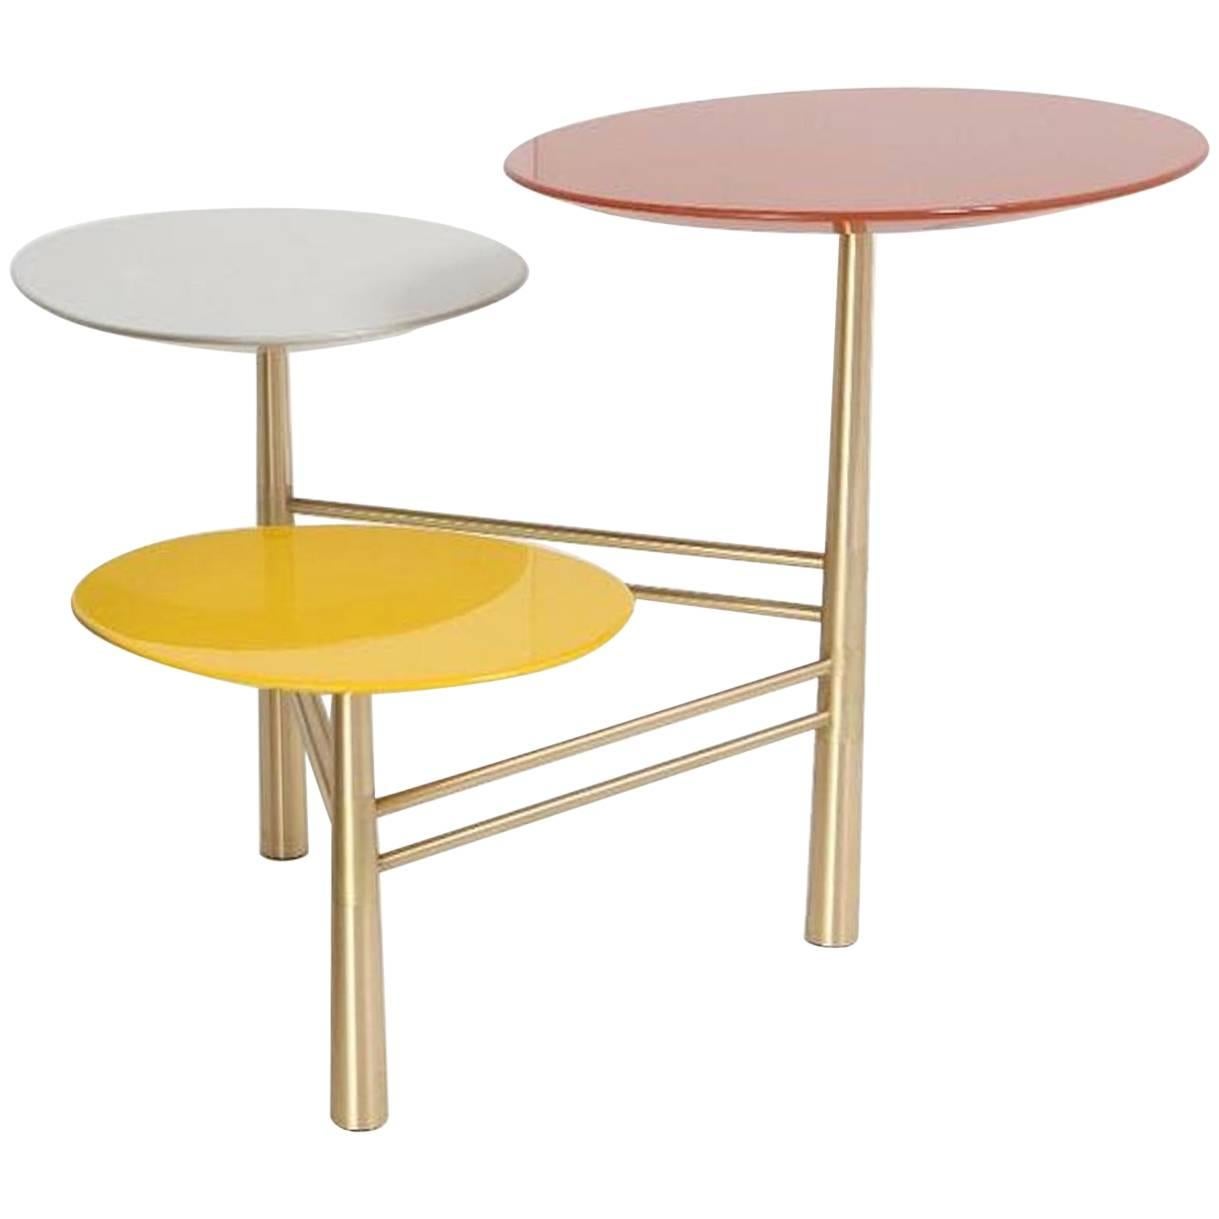 Pebble Side Table by Nada Debs